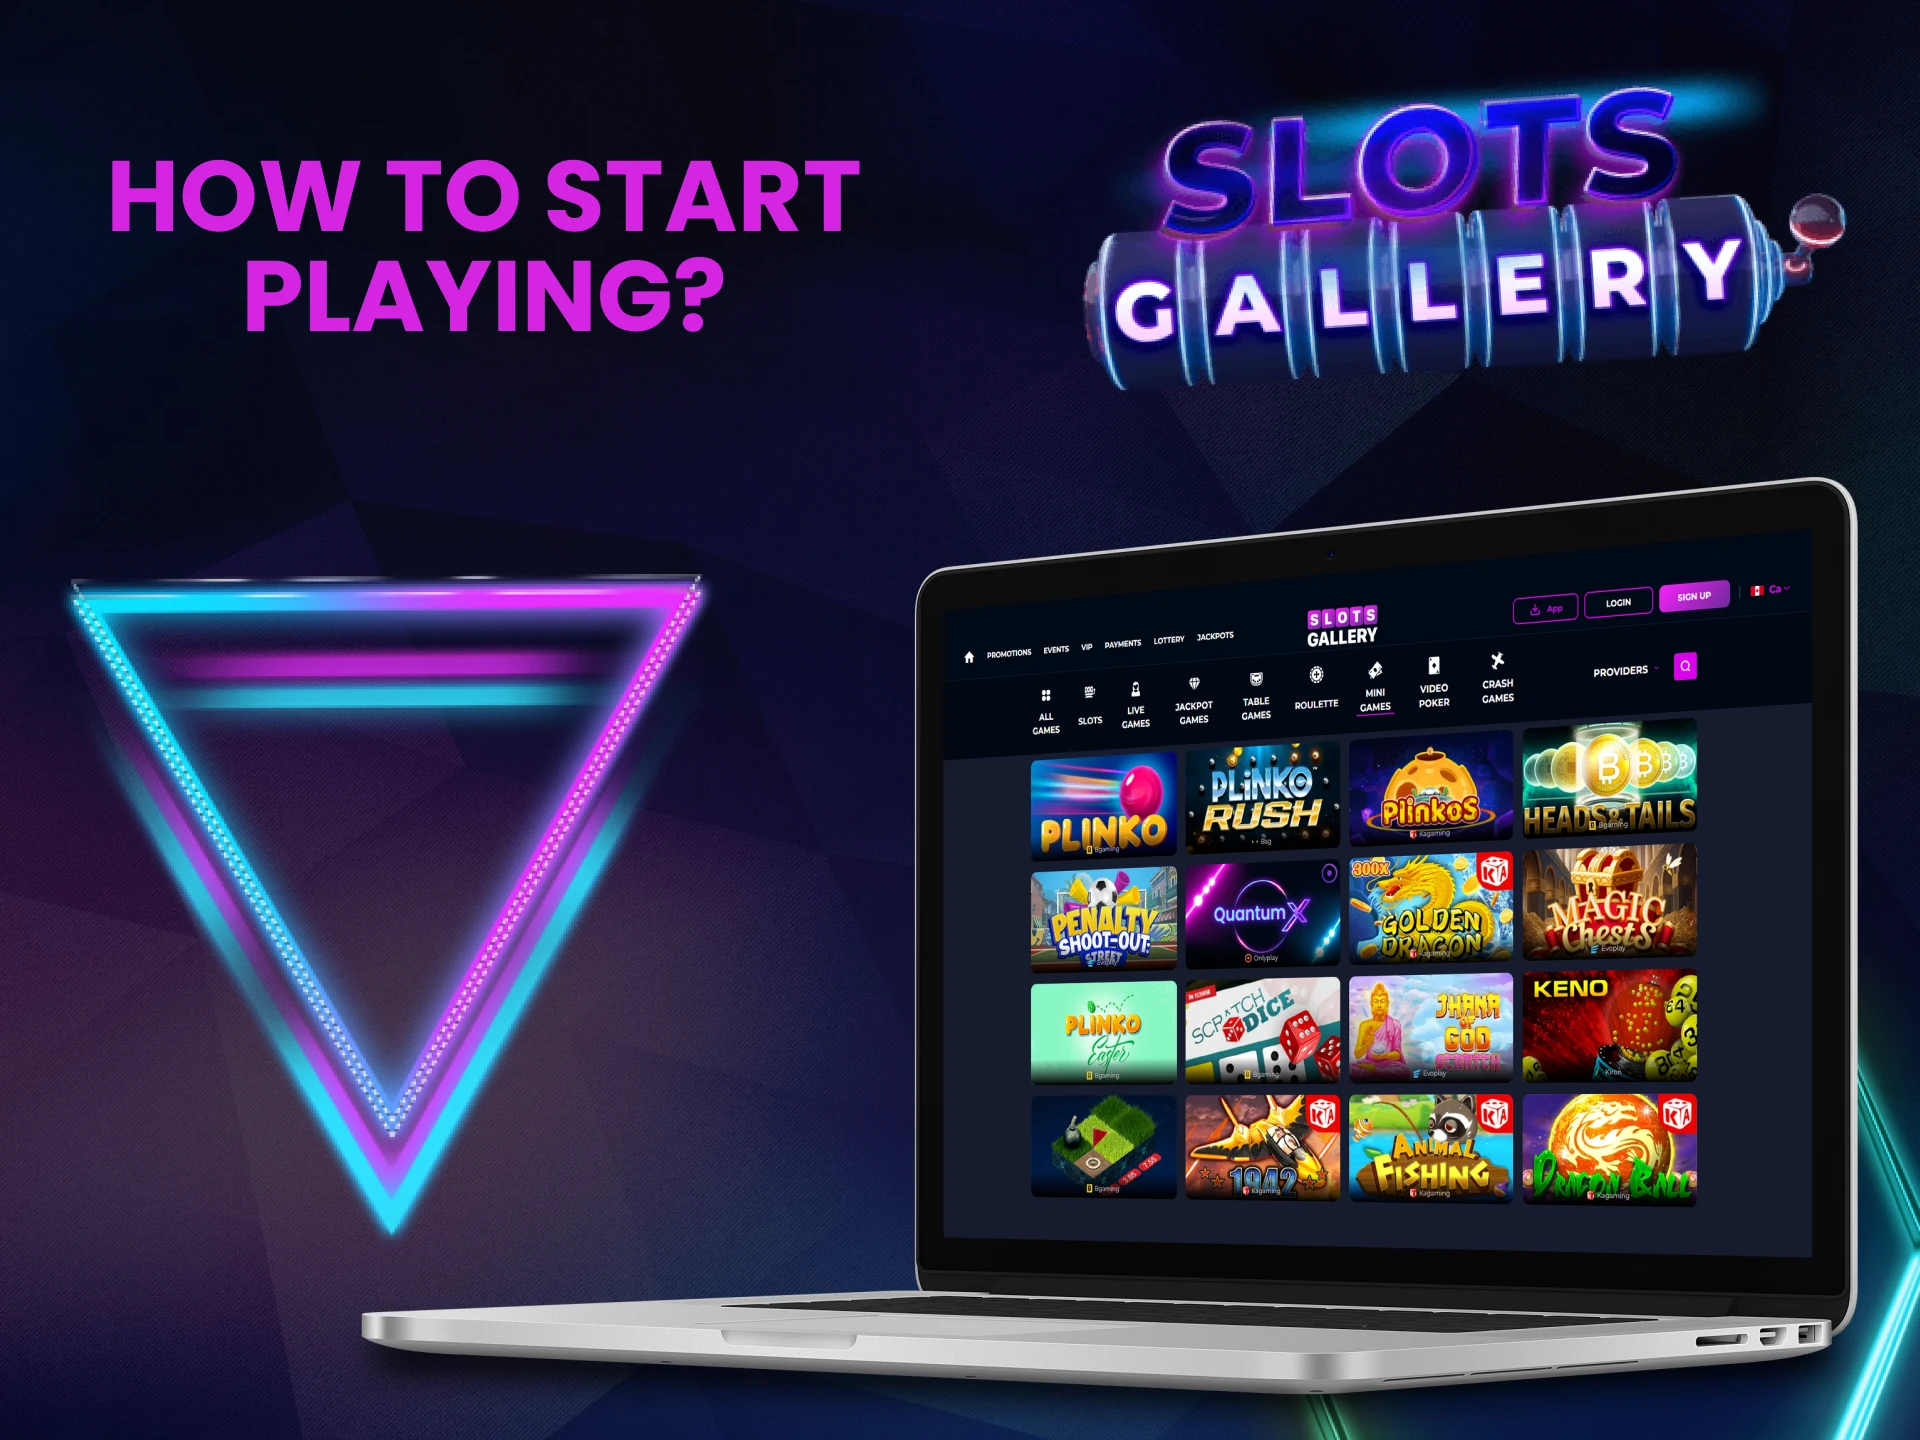 There is a section with mini games on the Slots Gallery website.